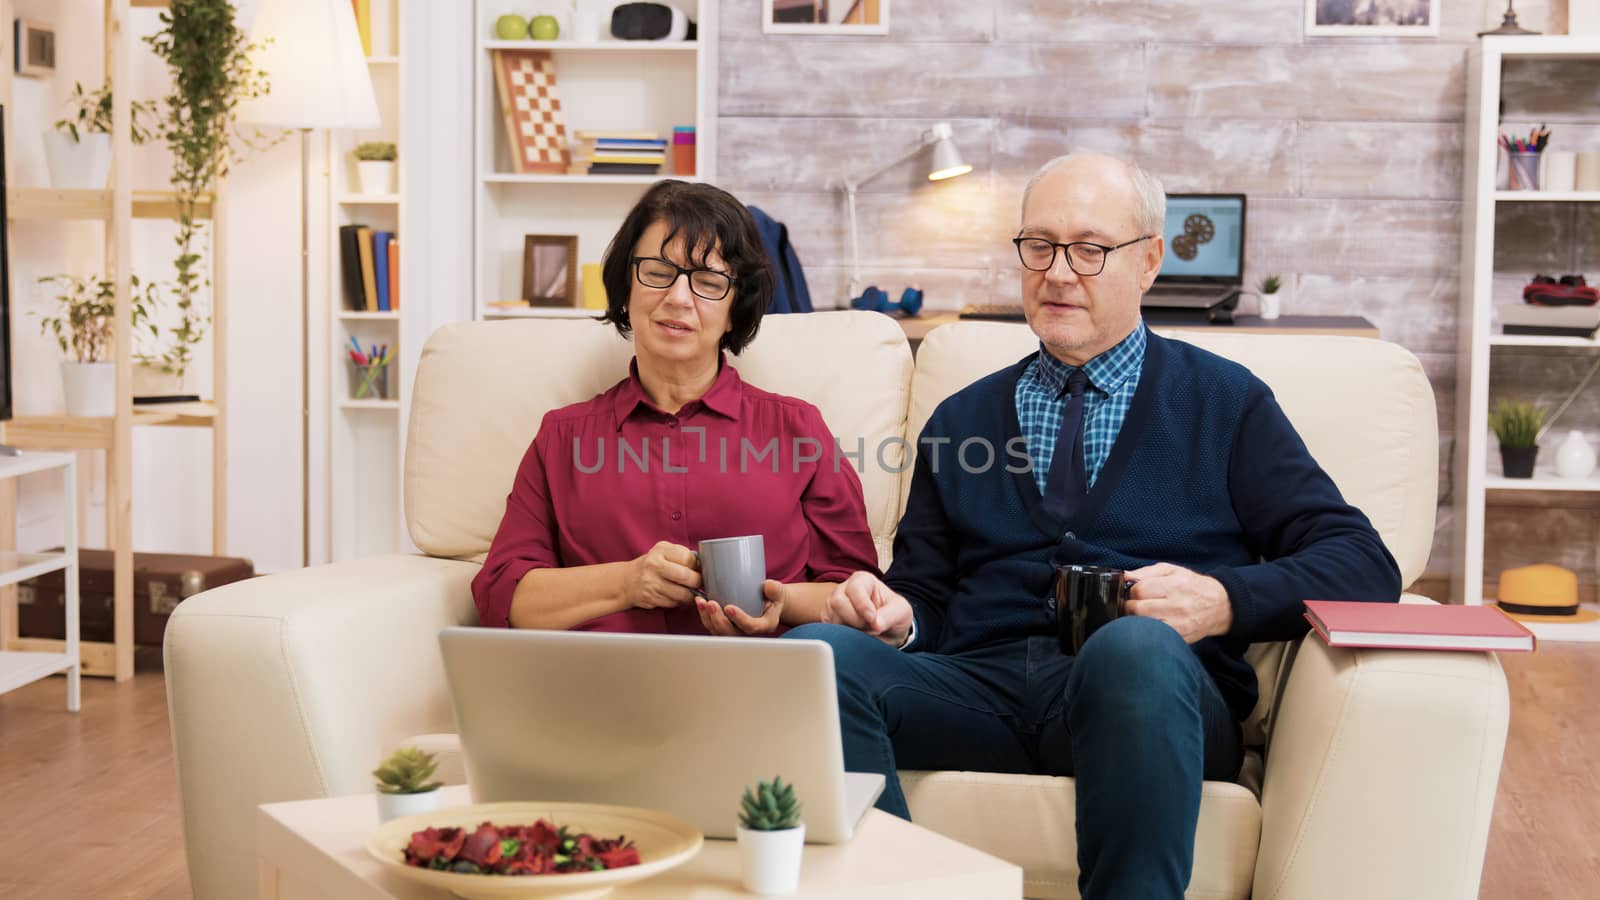 Couple of old people using modern technology. They are on a video call using laptop